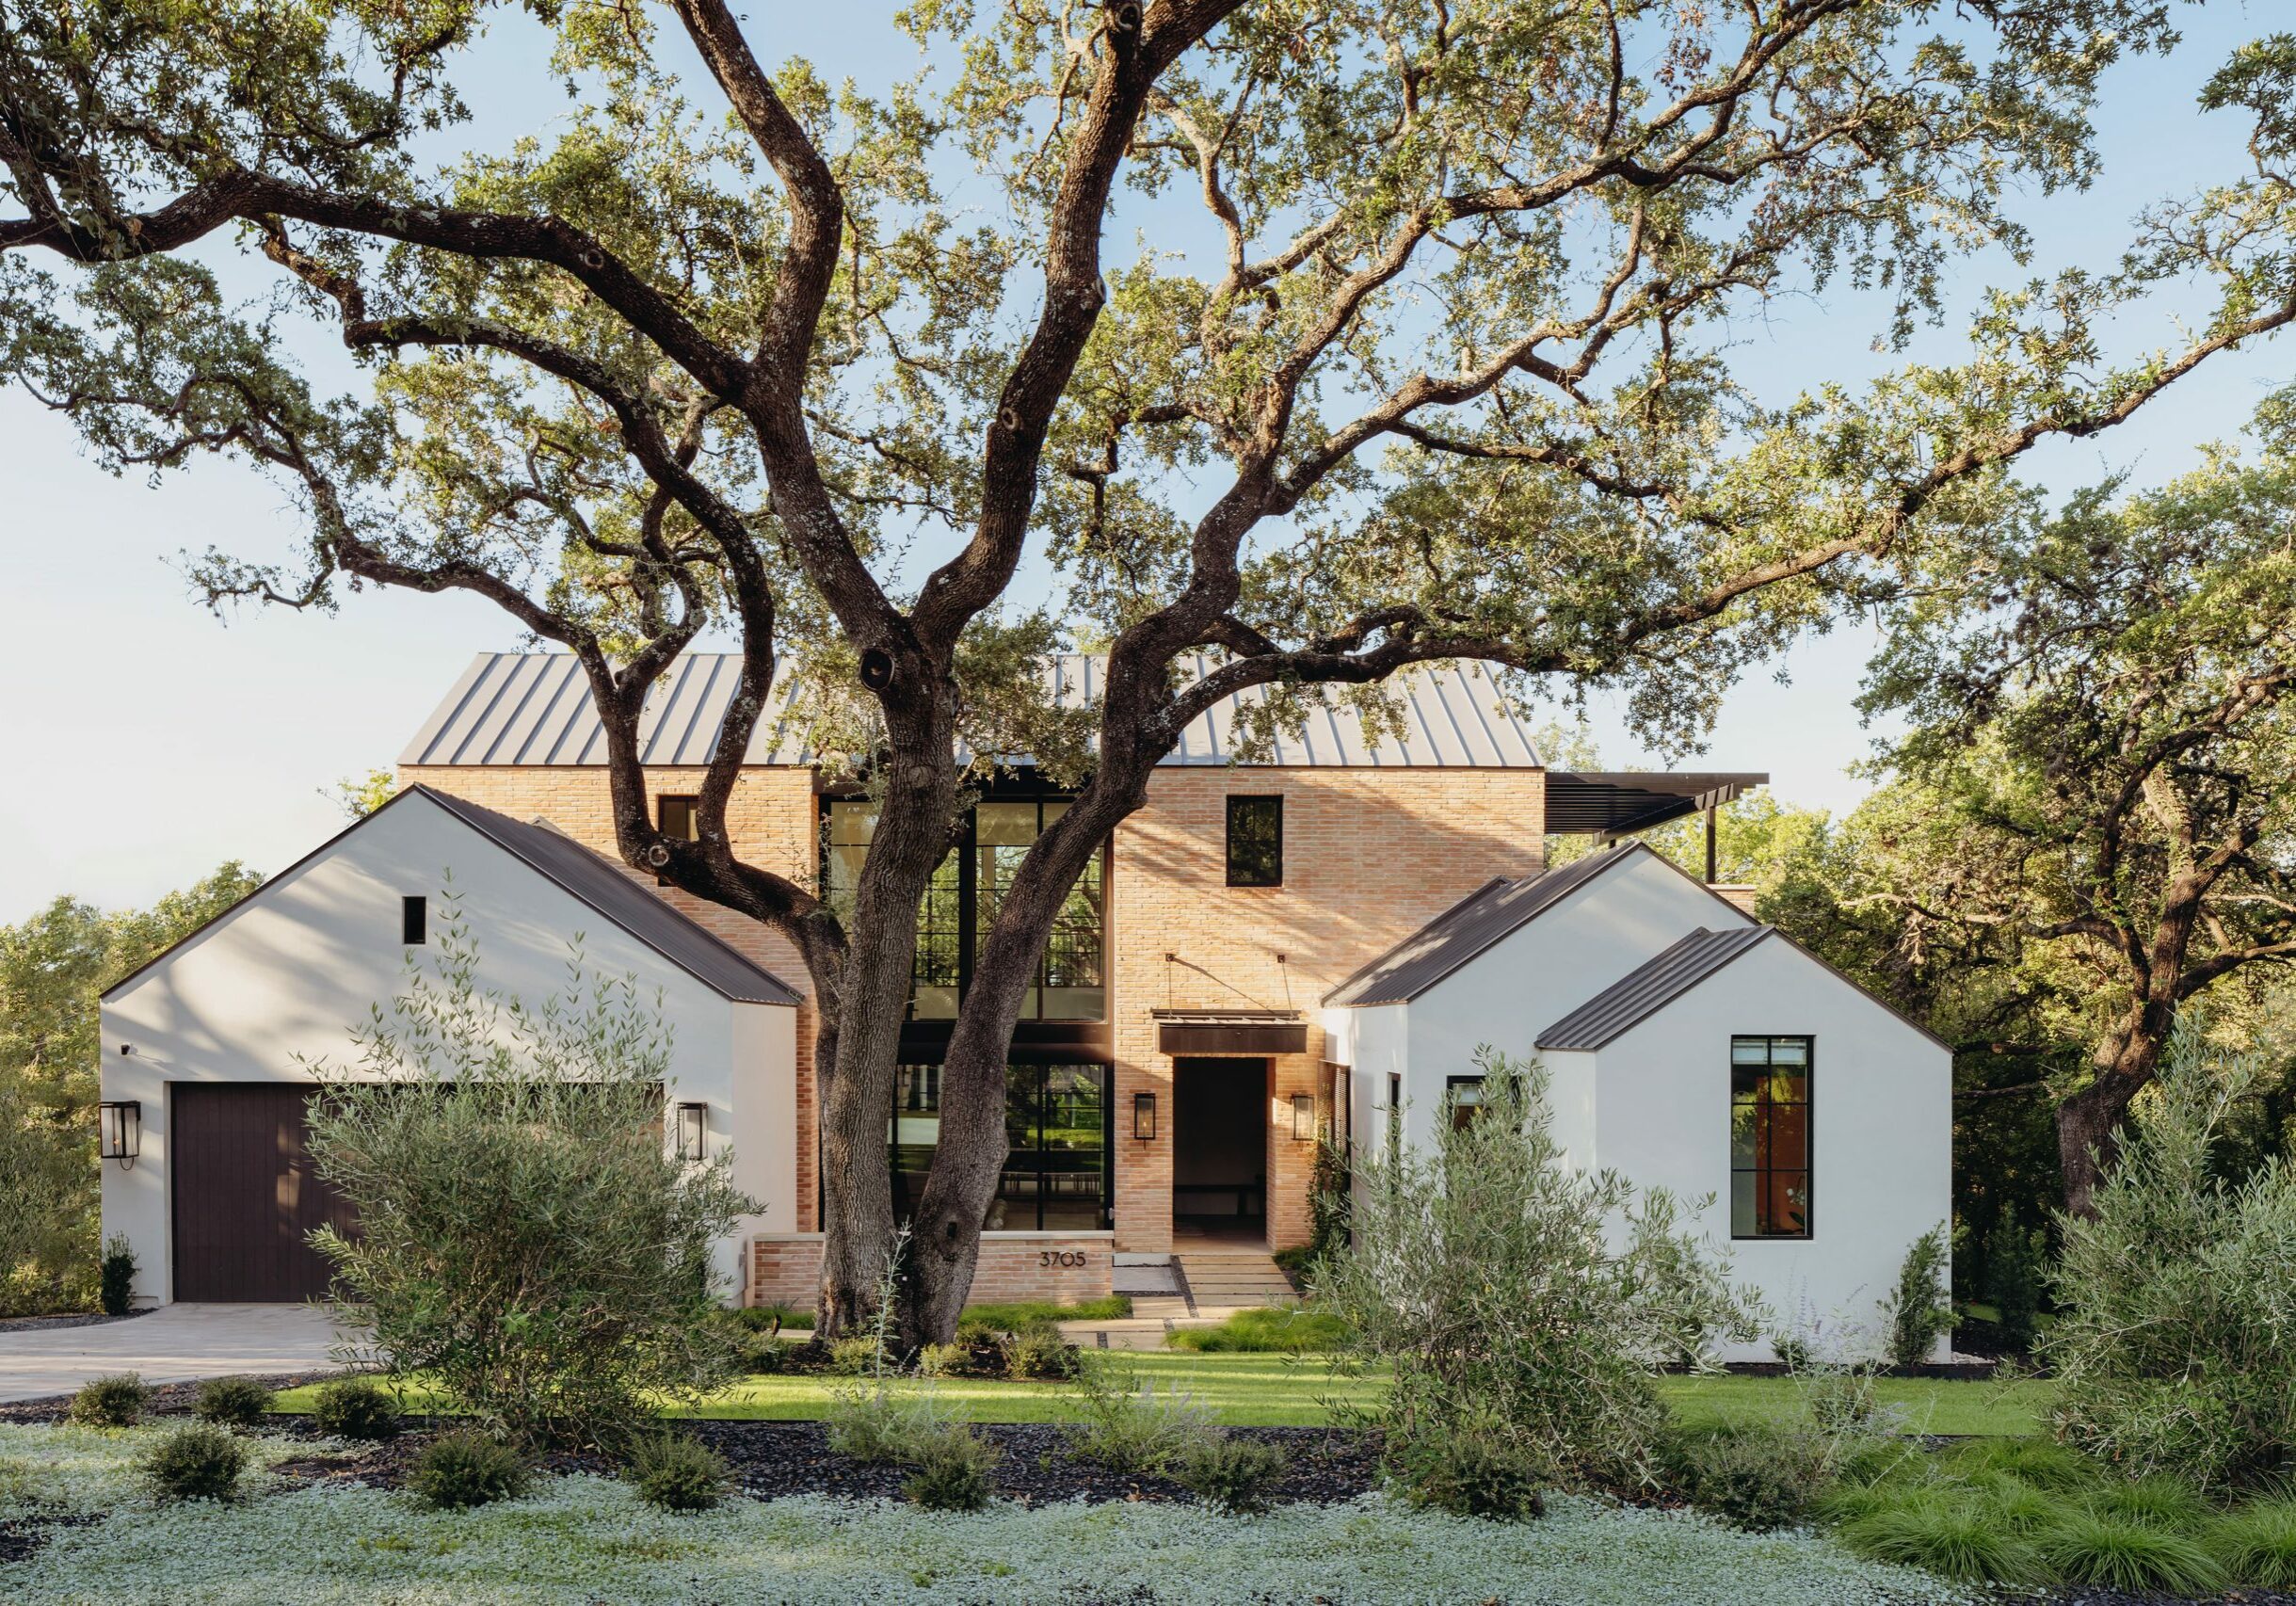 Exterior View of Home Designed by Austin Architect Jay Corder